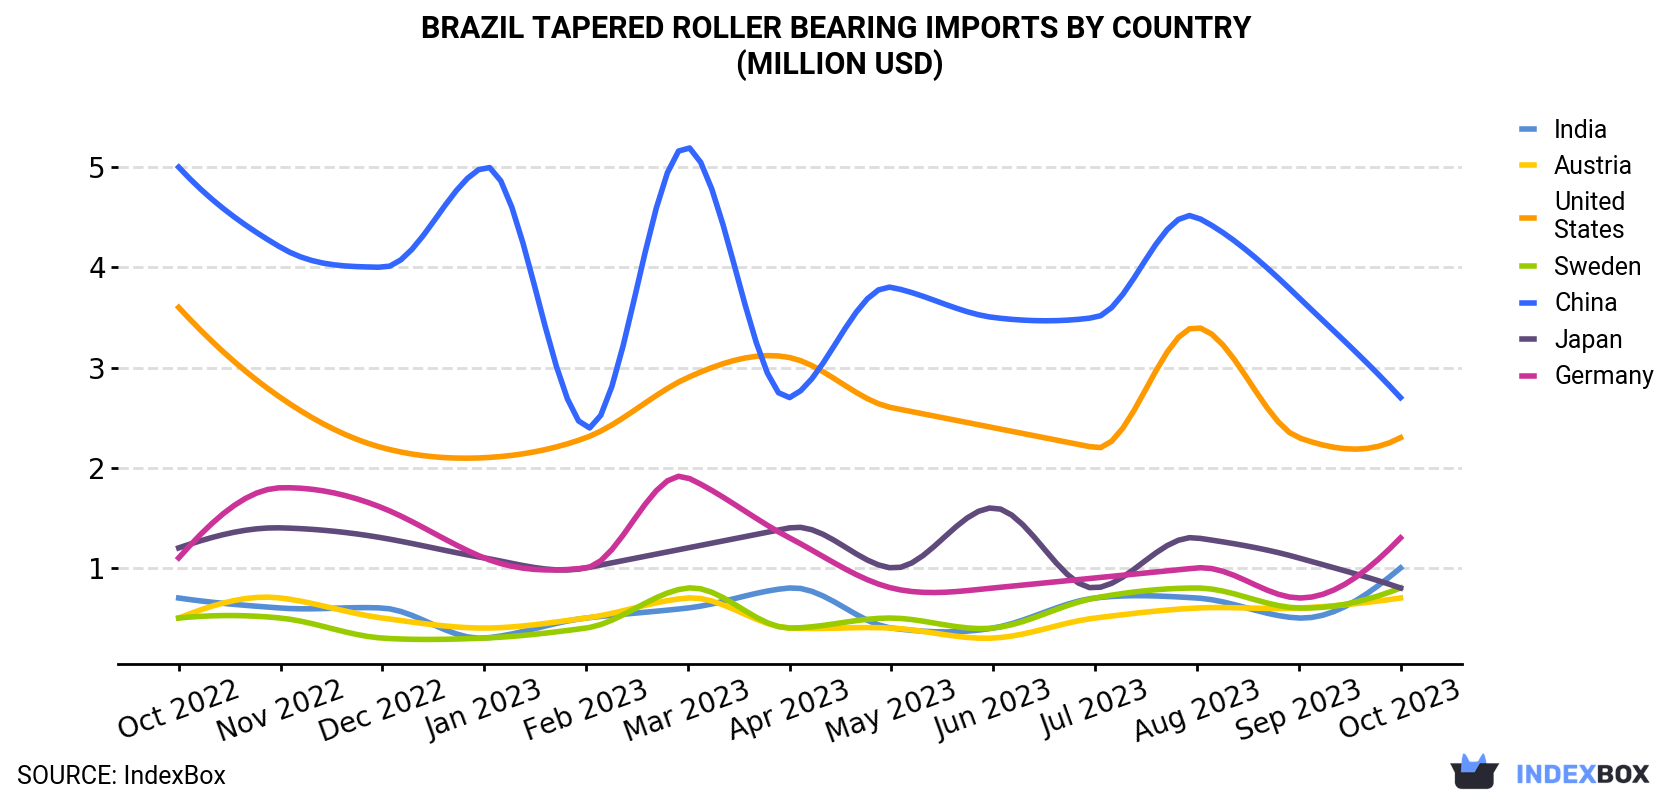 Brazil Tapered Roller Bearing Imports By Country (Million USD)